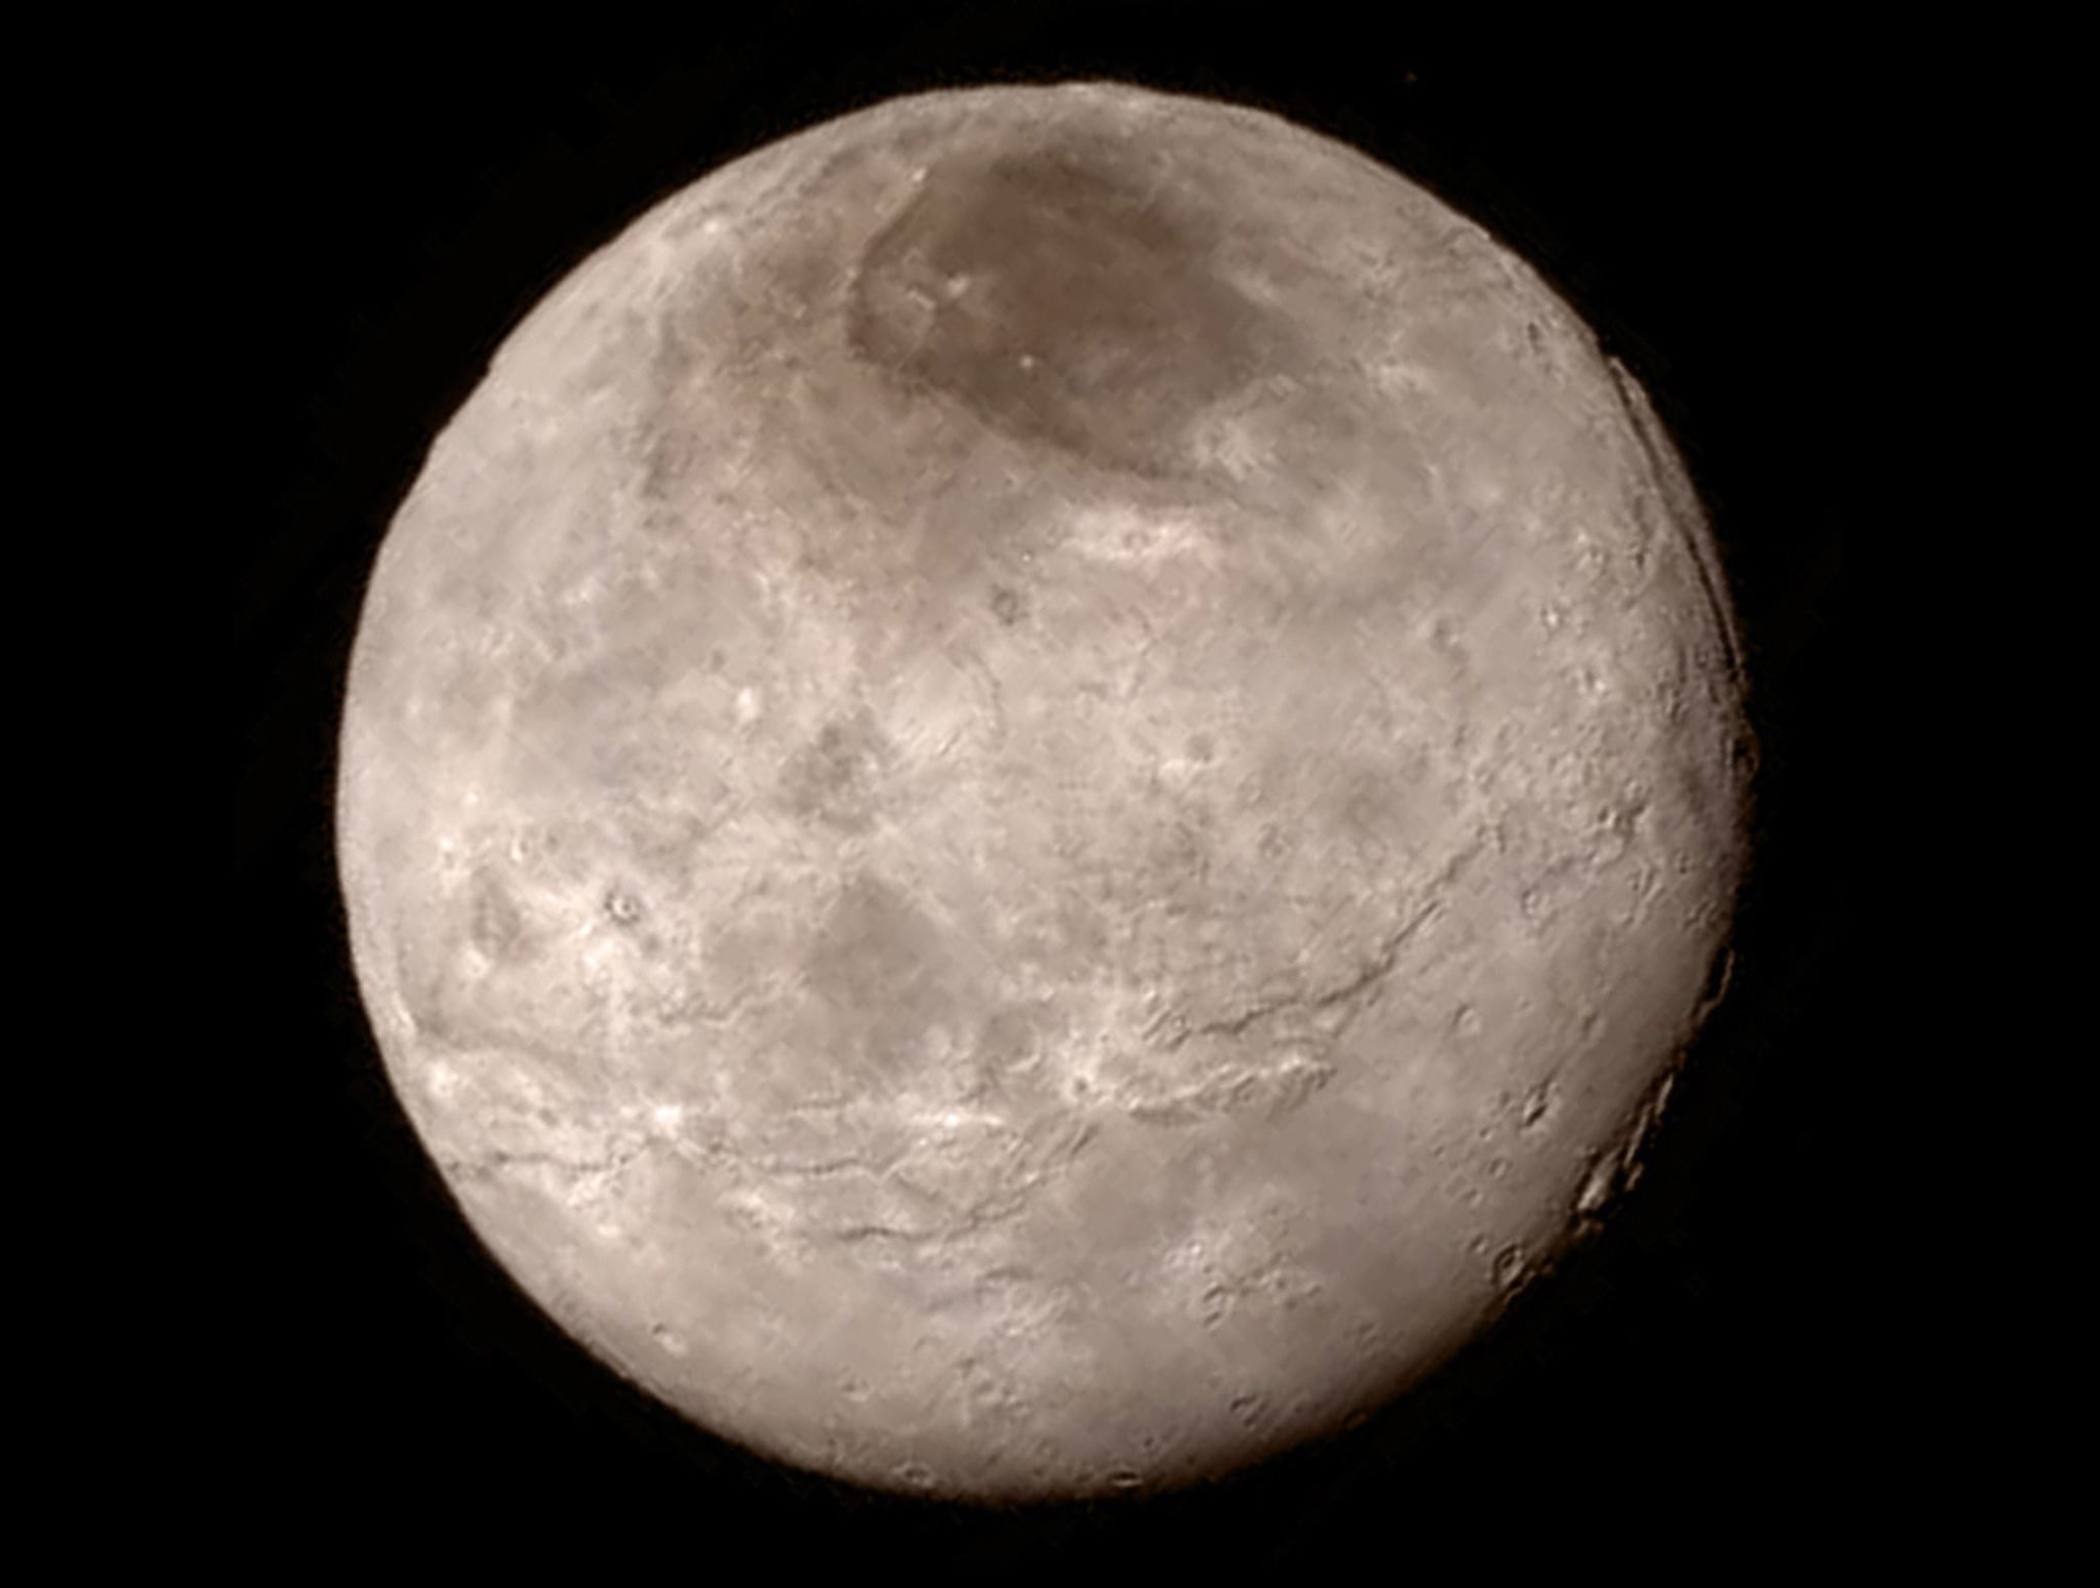 Charon, the largest moon of Pluto, captured by the New Horizons spacecraft on July 13, 2015 from a distance of 290,000 miles.